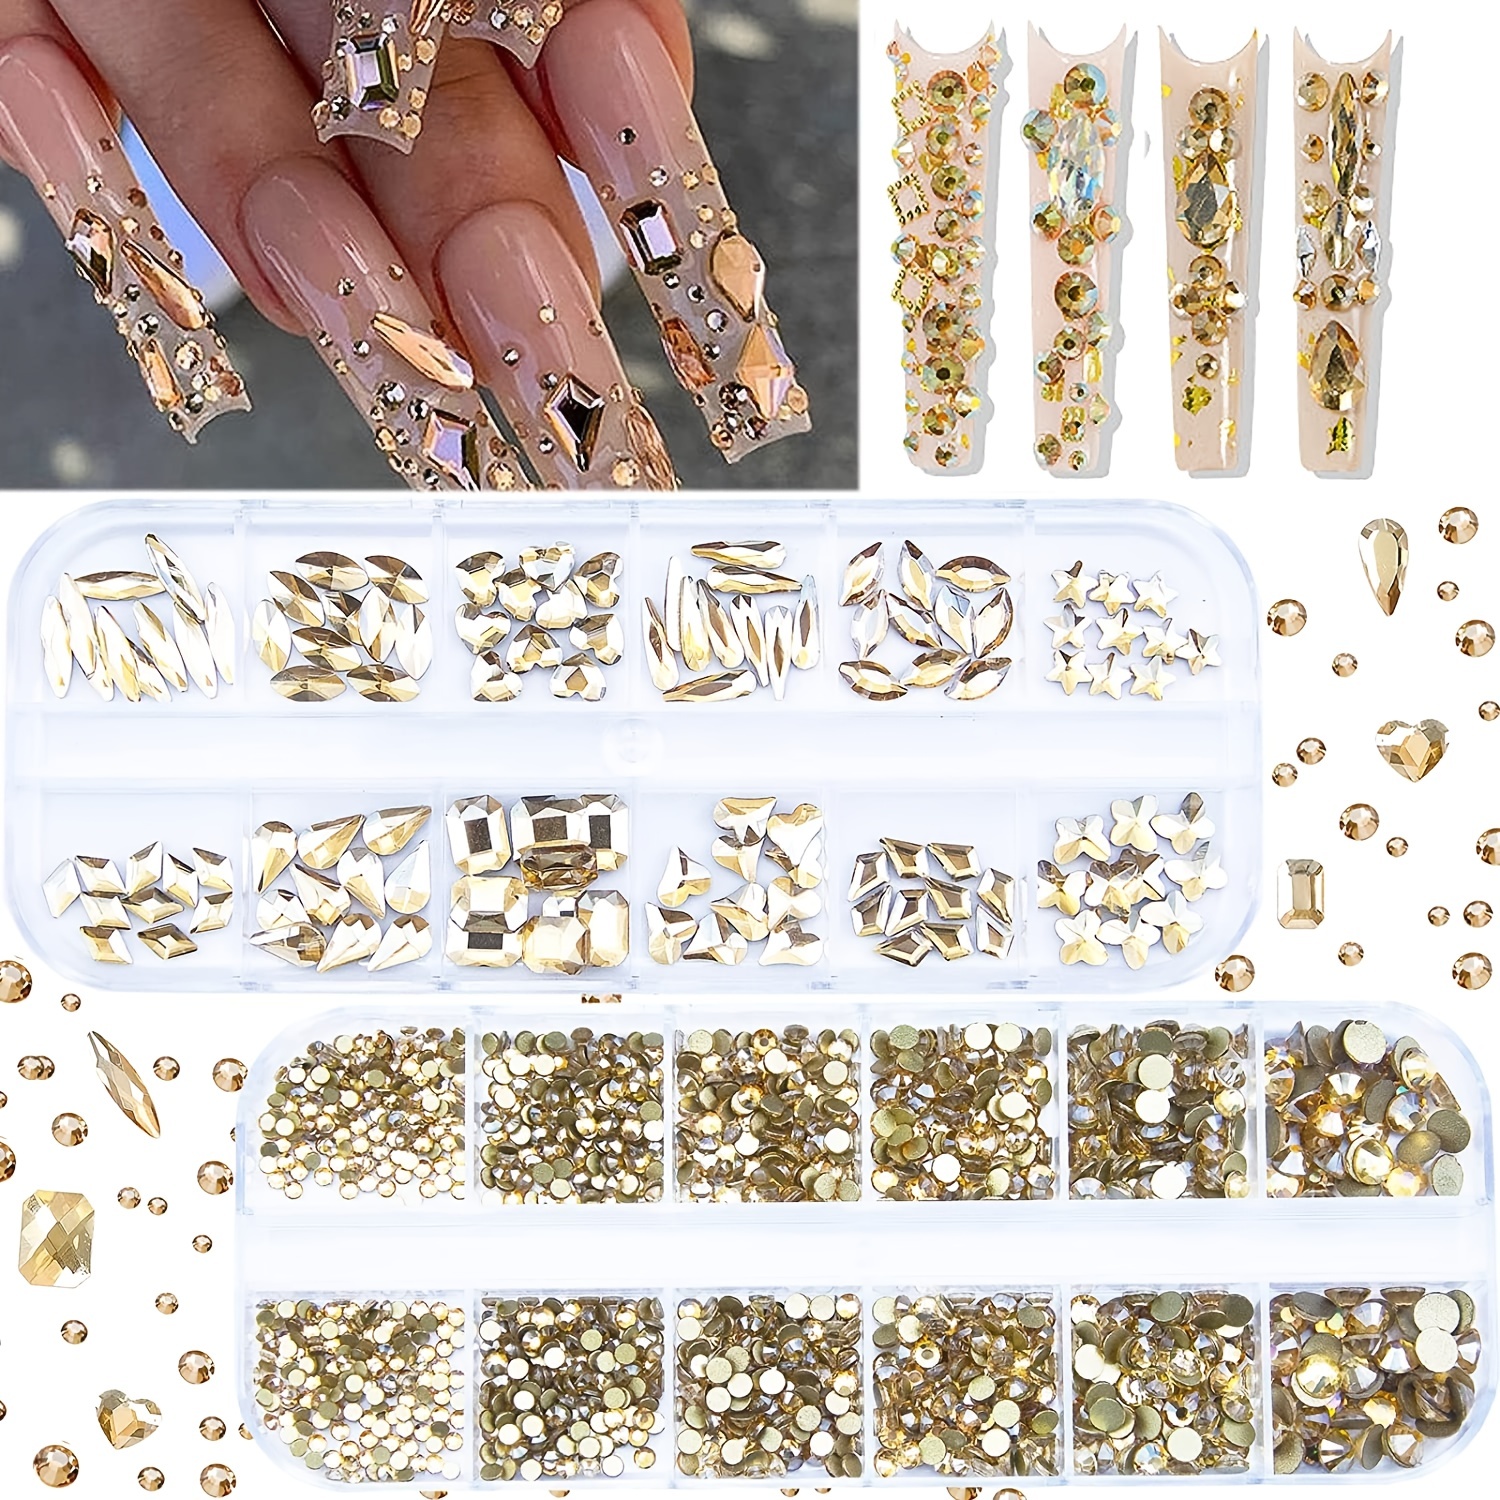 Round Rhinestones, Flatback Crystals Glass Rhinestone for Nails Makeup Arts  and Crafts - style 5 